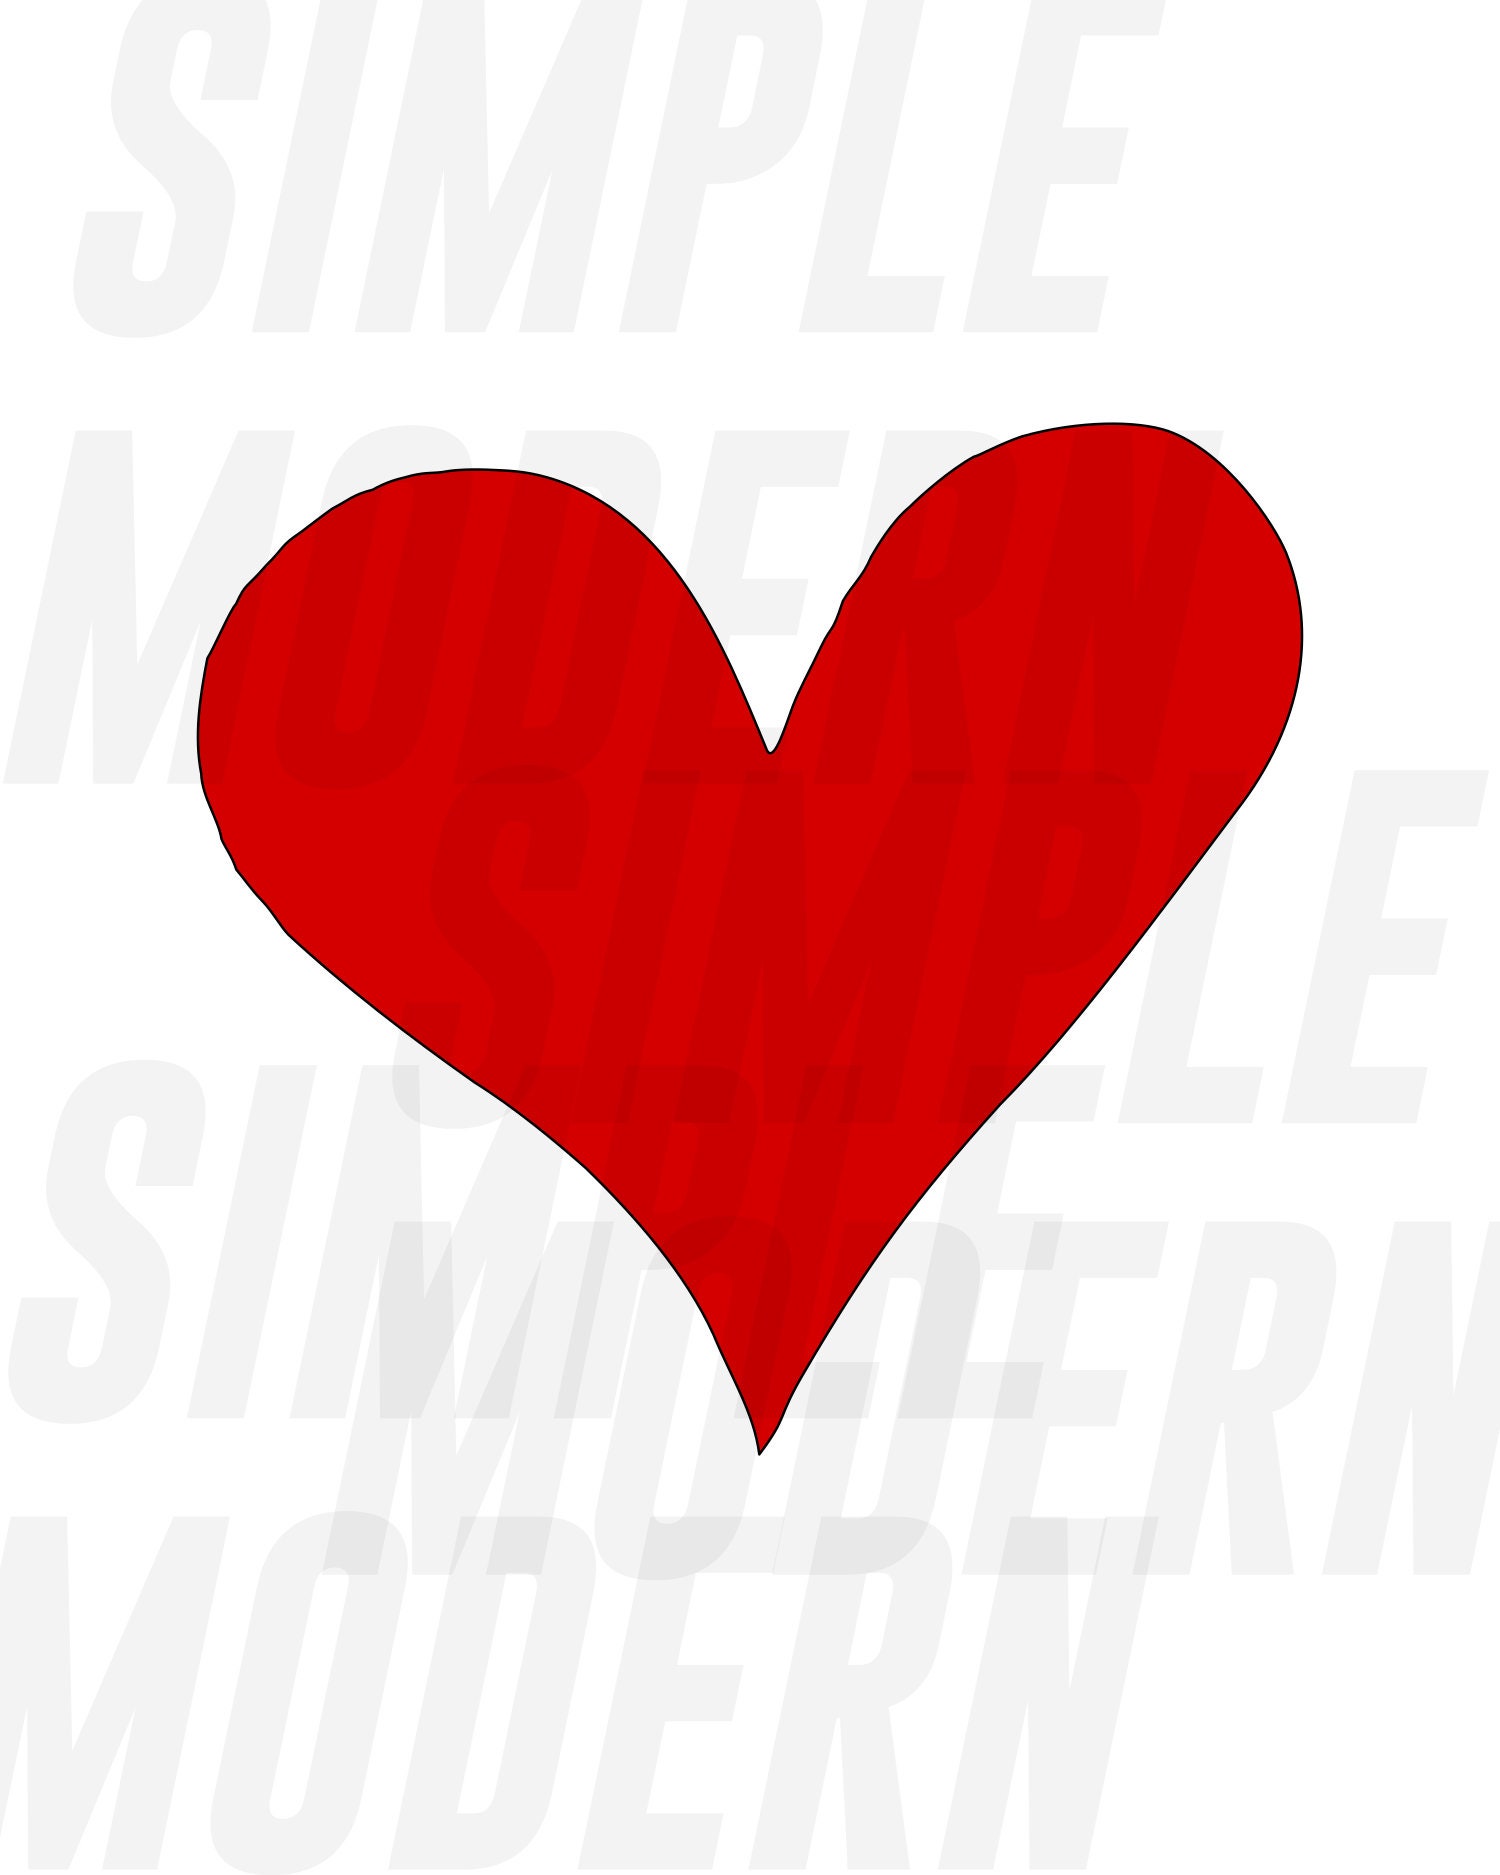 File:Red-simple-heart-symbol-only.png - Wikipedia